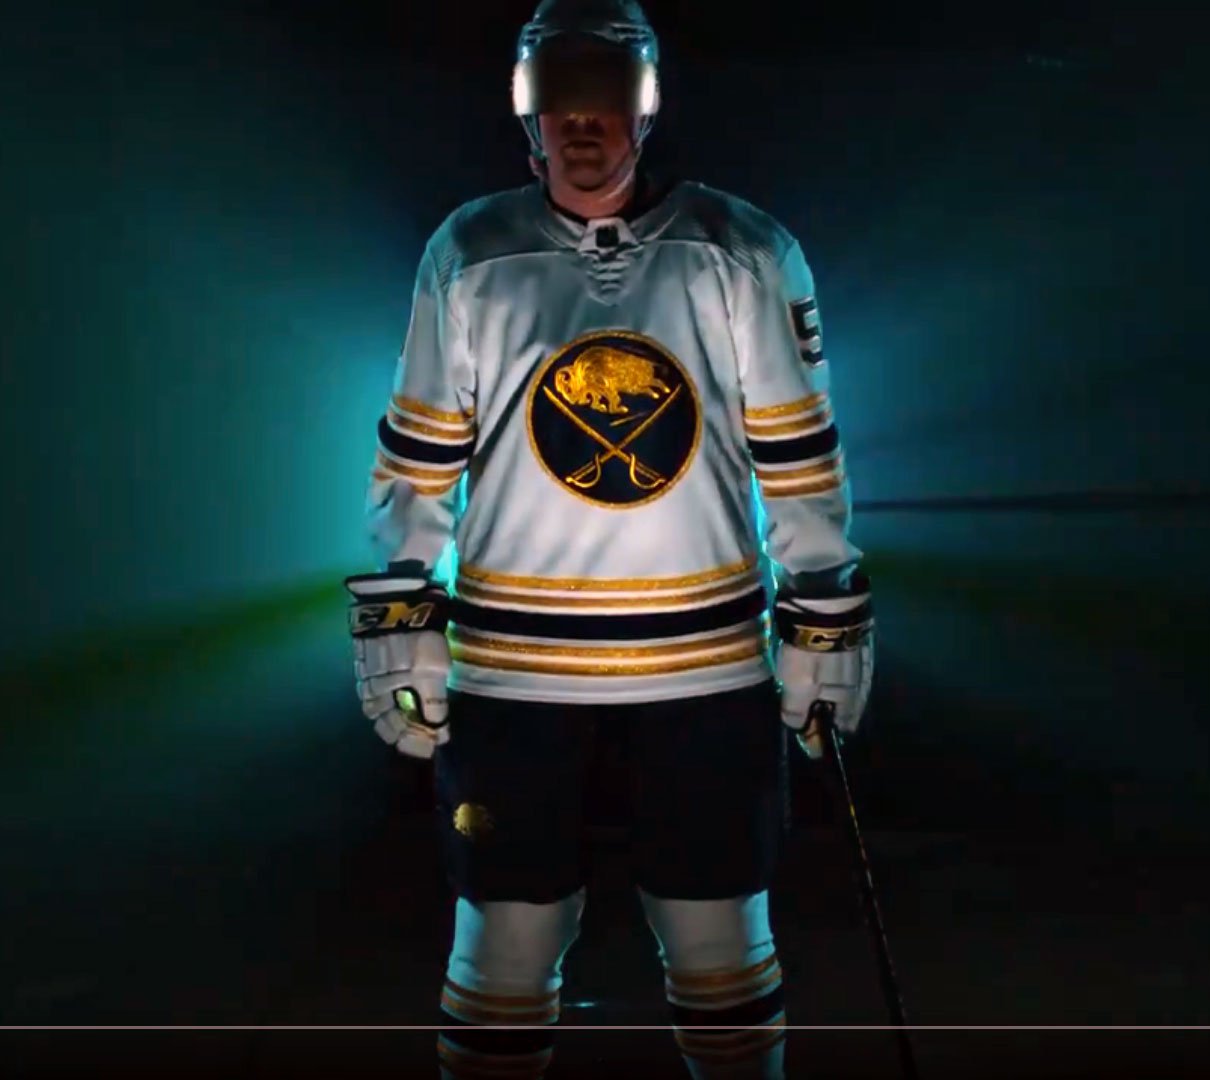 Buffalo Sabres Return to Royal, Unveil New Logo and Uniforms